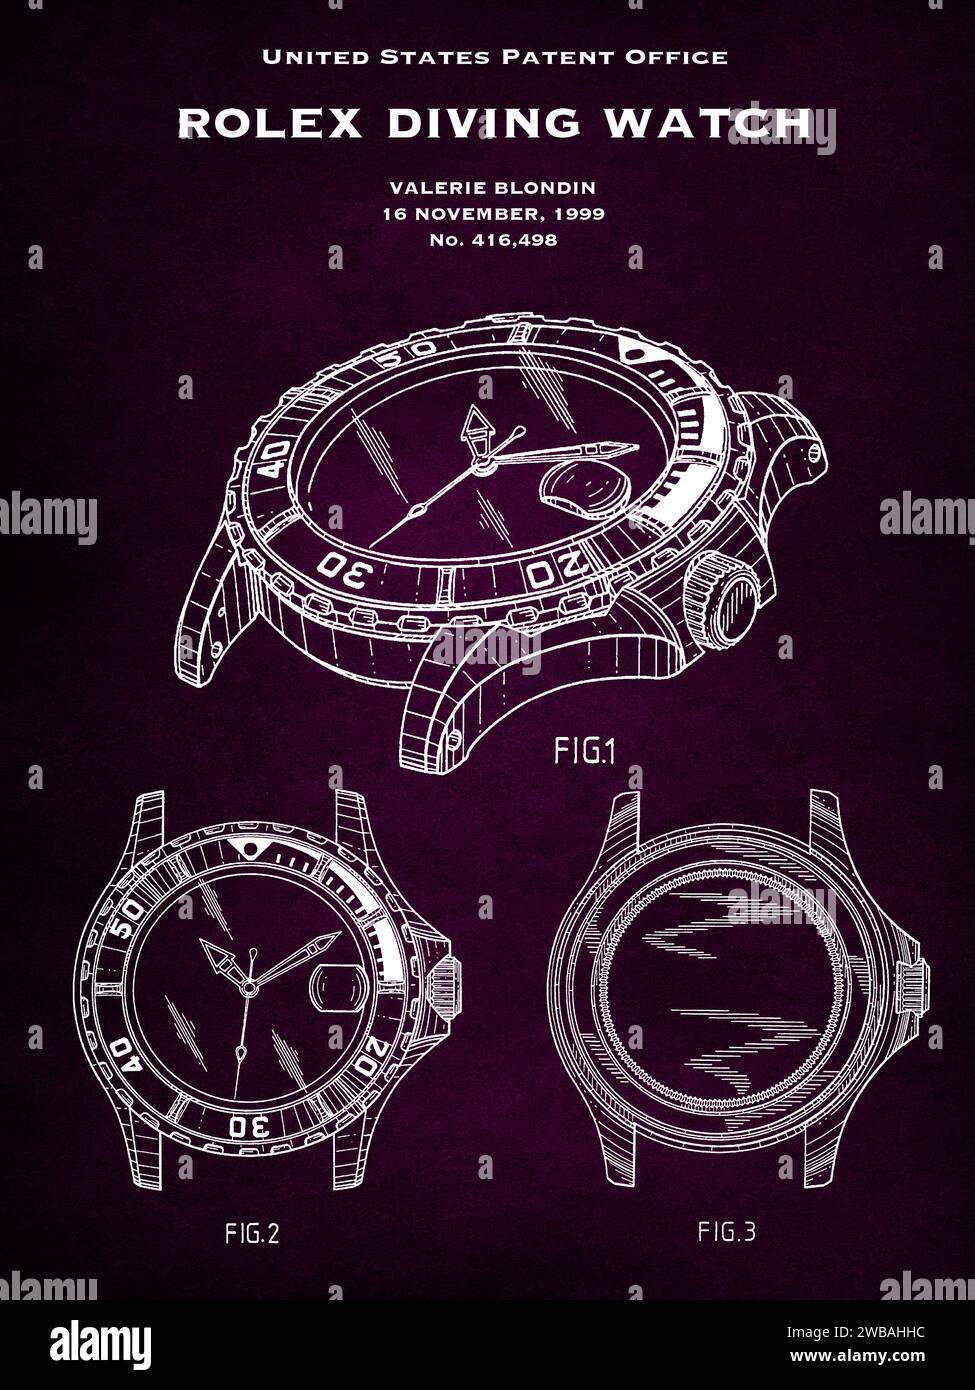 US patent office design from 1999 of a Rolex dive watch watch on a purple background Stock Photo